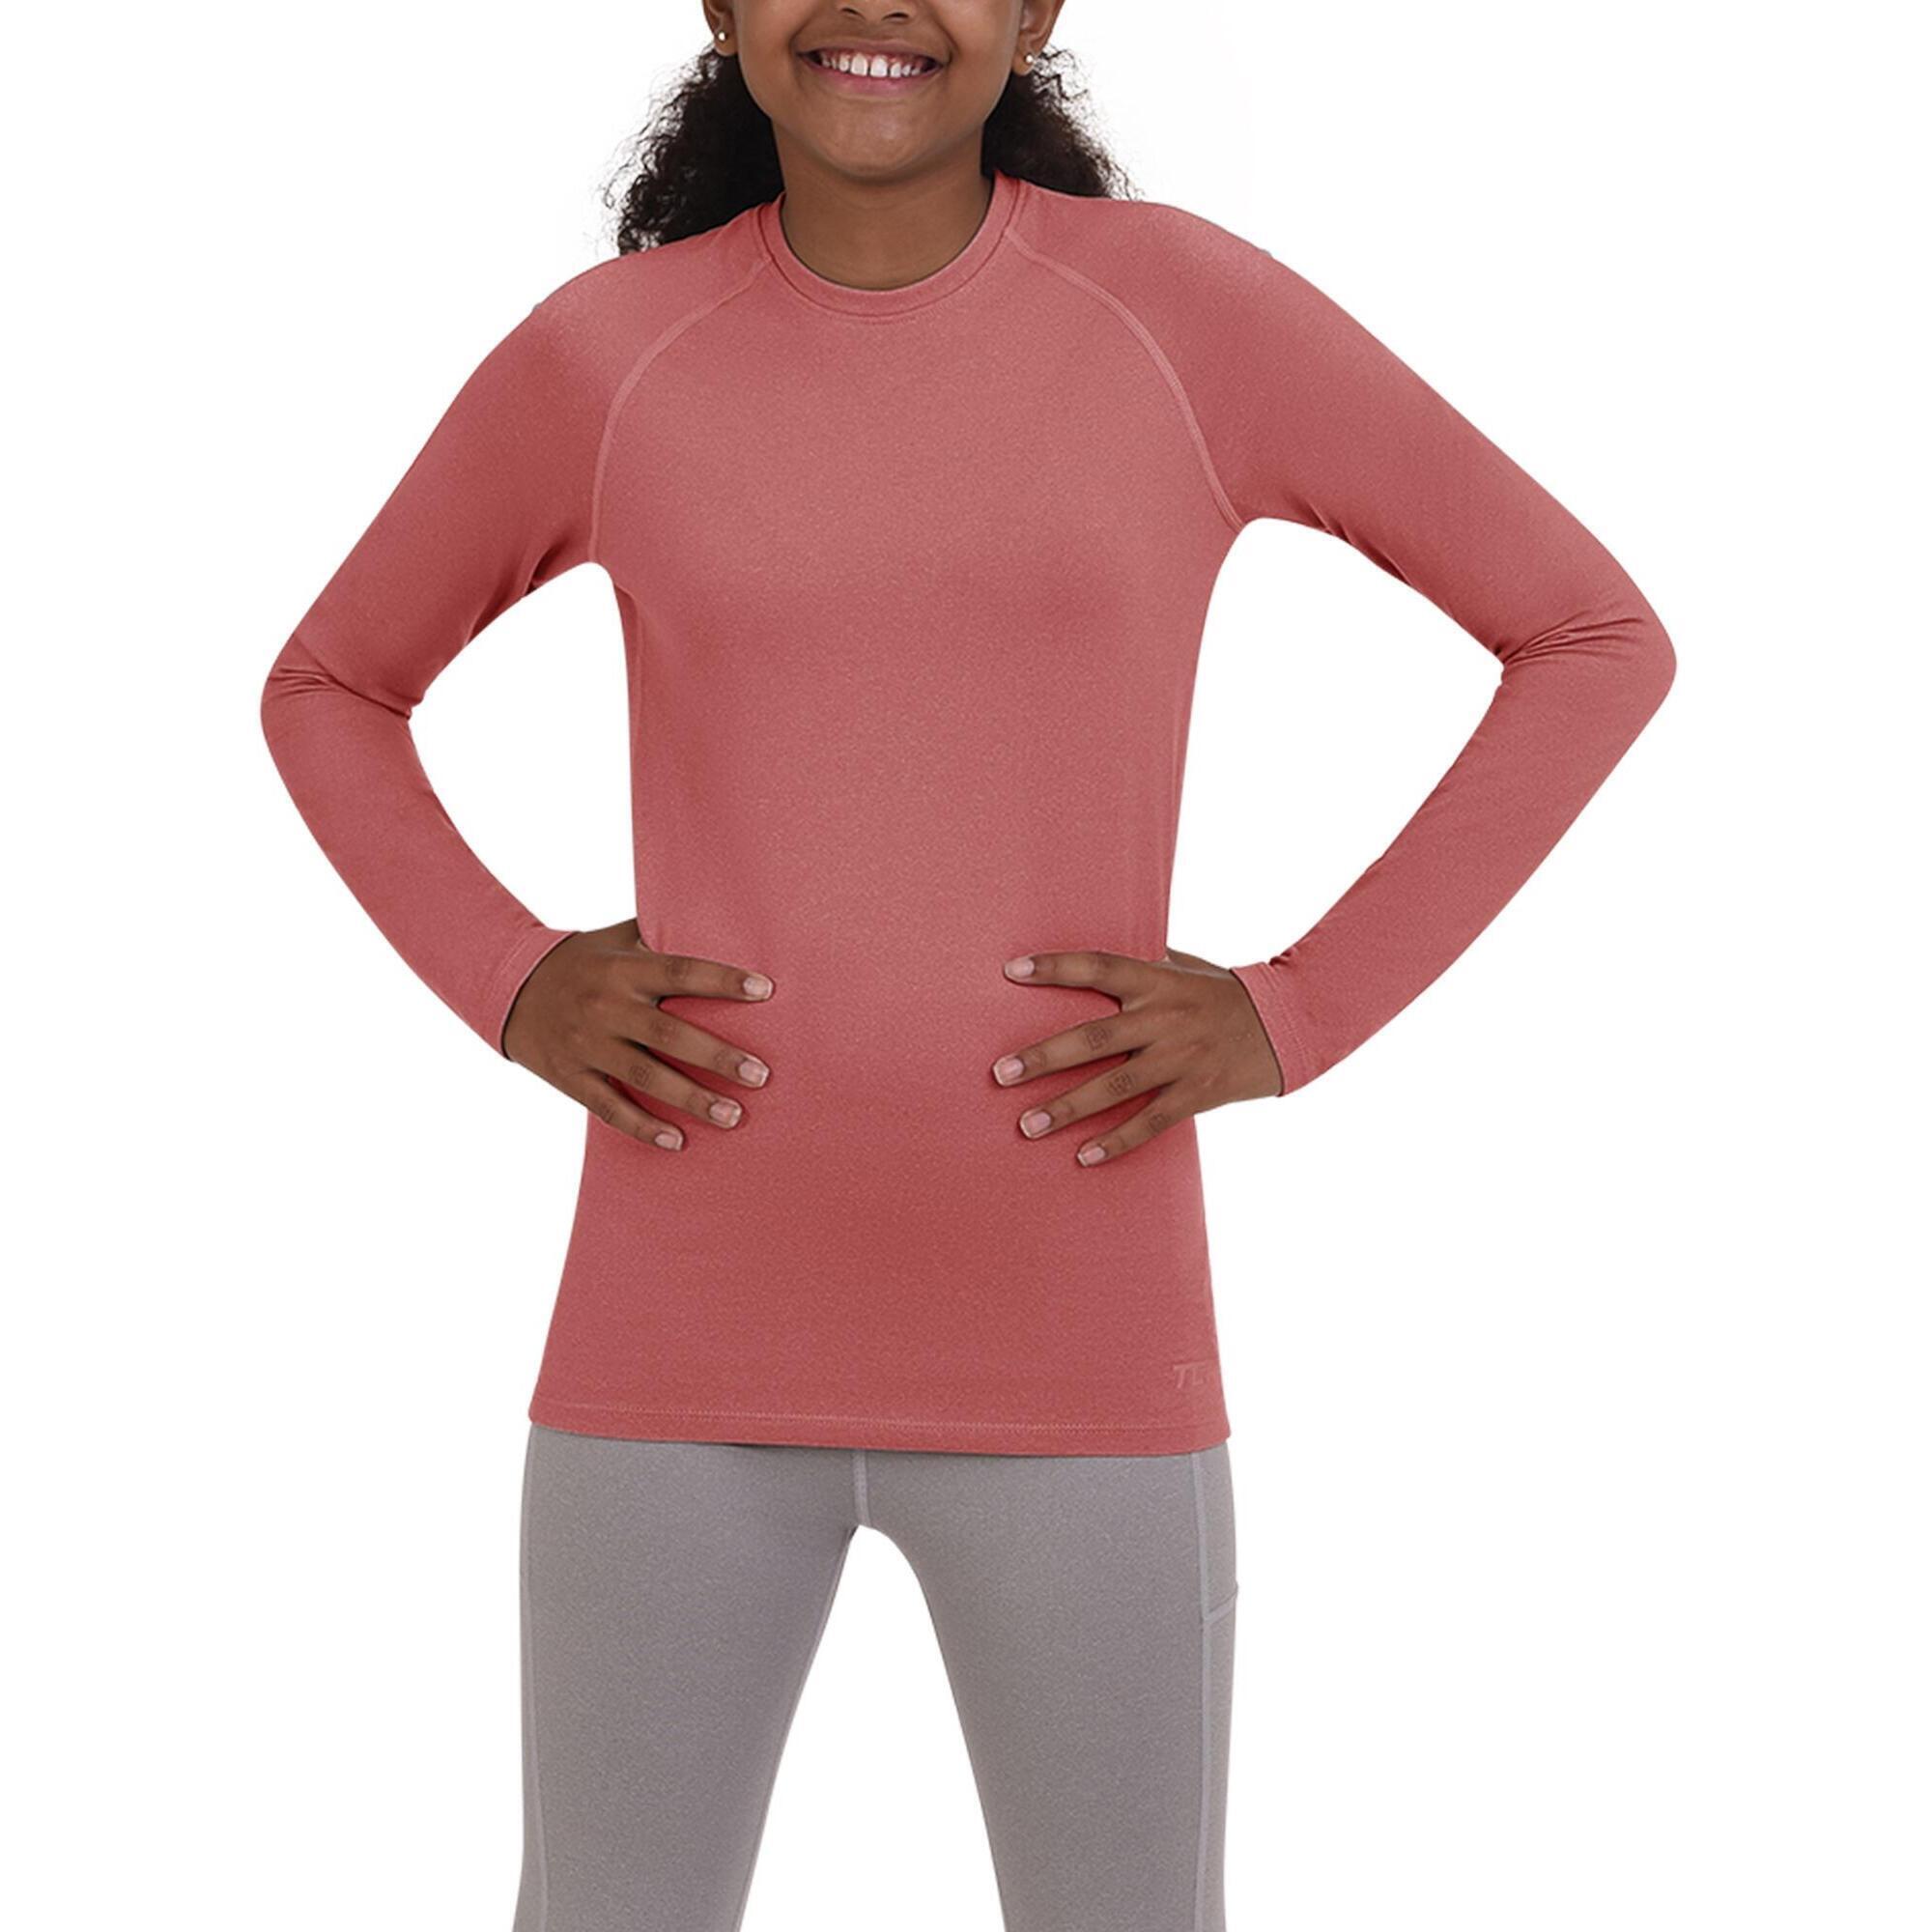 TCA Girls' Super Thermal Base Layer Top - Dusty Rose Marl